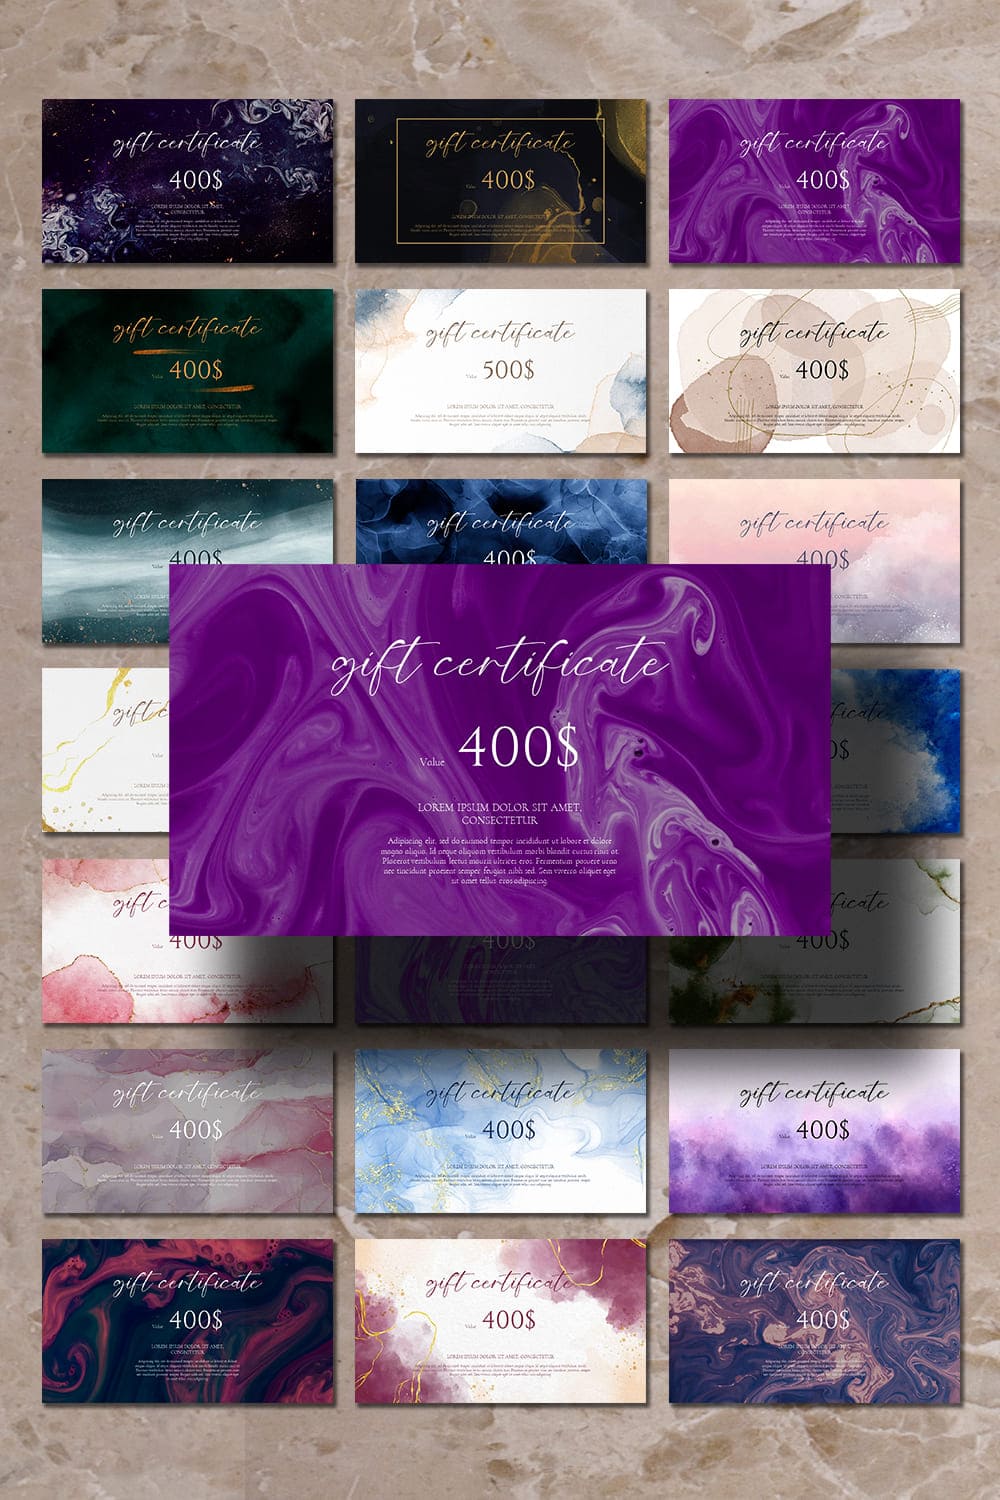 Powerpoint gift certificate template, picture for pinterest 1000x1500.